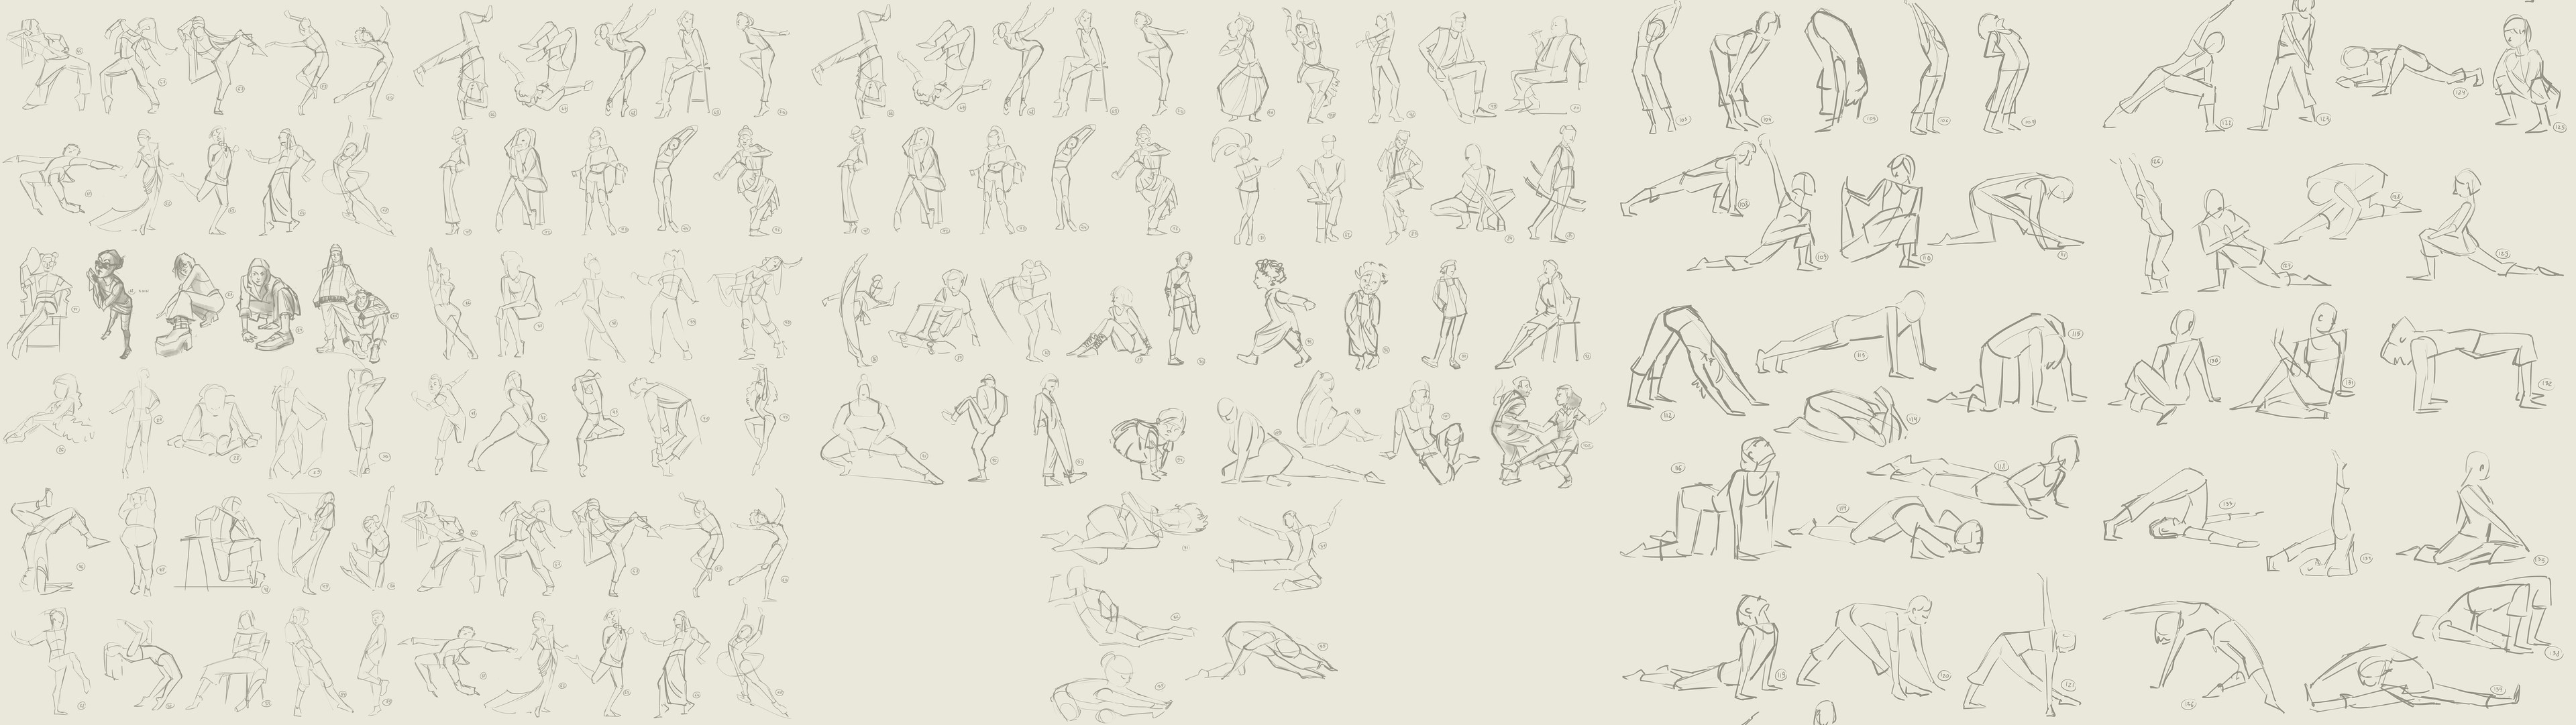 30 sec to 5 min gesture sketches from Projector workshop (2021)